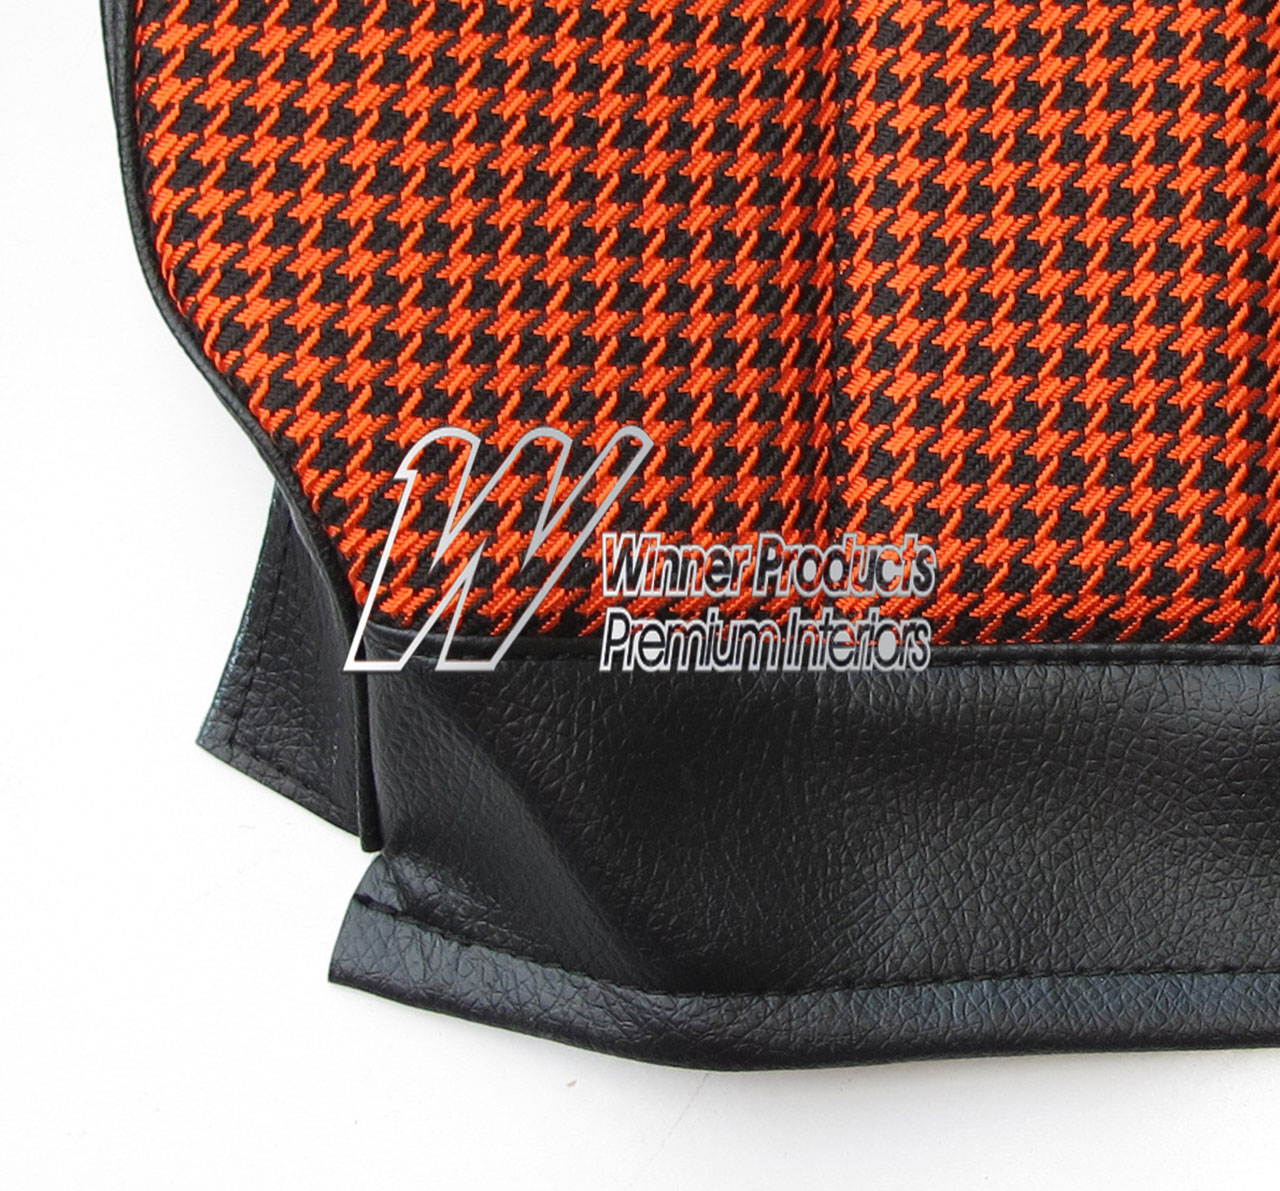 Holden Monaro HT Monaro GTS Coupe 10Z Black & Houndstooth Seat Covers (Image 5 of 5)